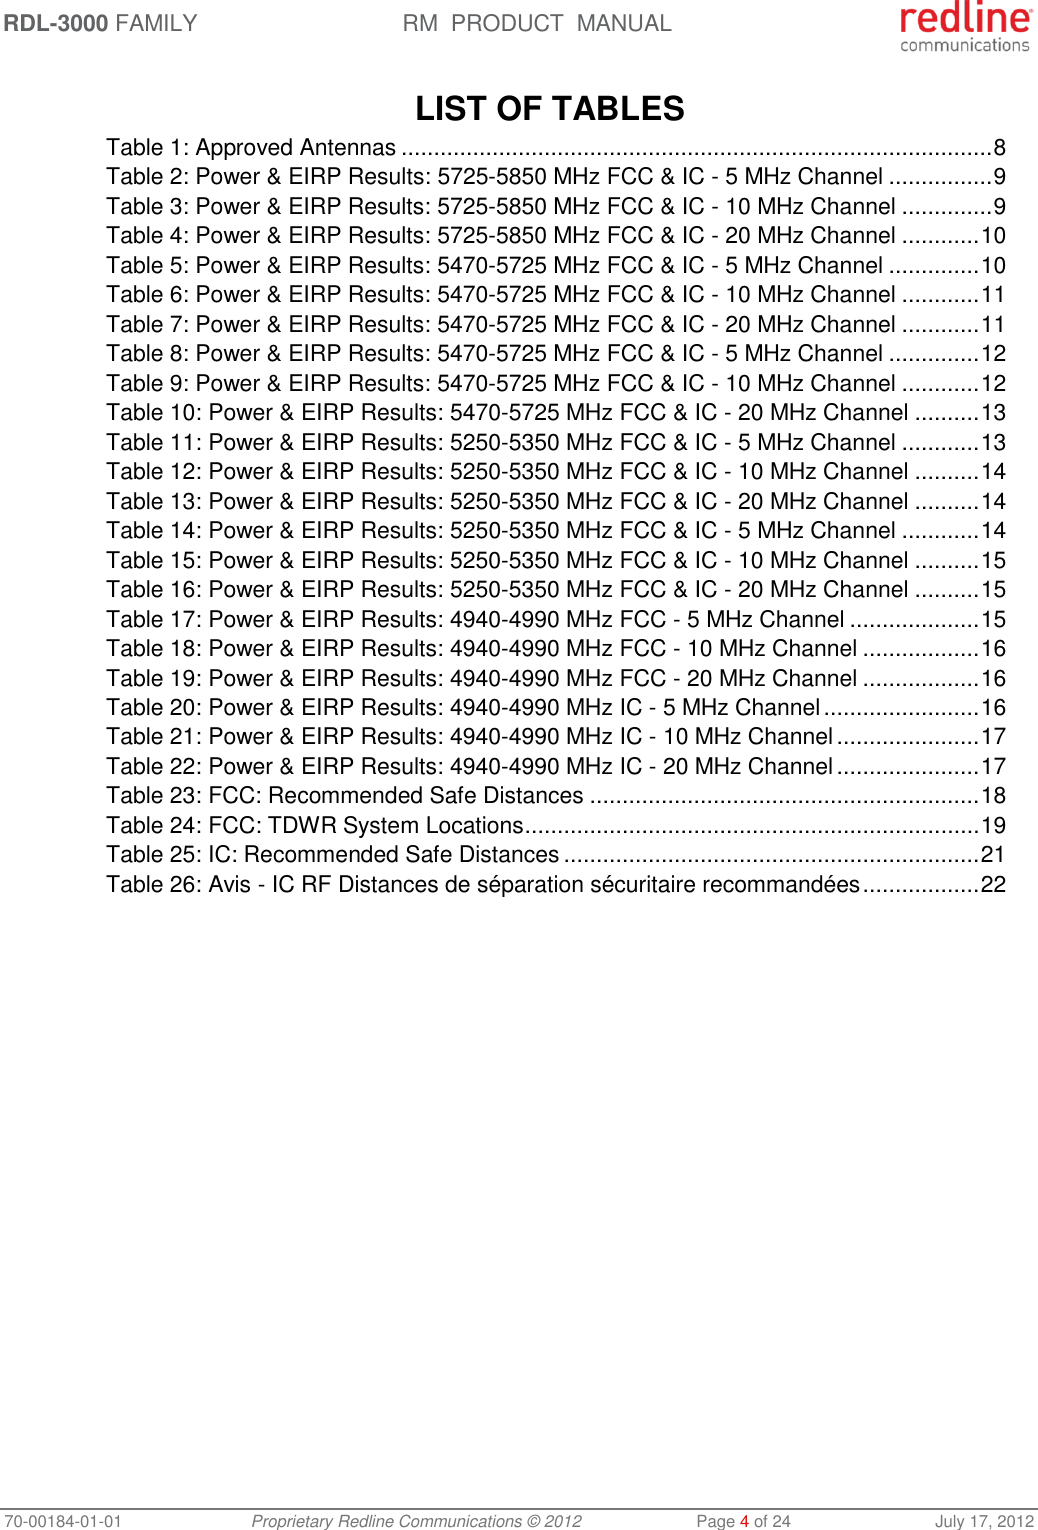 RDL-3000 FAMILY RM  PRODUCT  MANUAL 70-00184-01-01 Proprietary Redline Communications © 2012  Page 4 of 24  July 17, 2012  LIST OF TABLES Table 1: Approved Antennas ........................................................................................... 8 Table 2: Power &amp; EIRP Results: 5725-5850 MHz FCC &amp; IC - 5 MHz Channel ................ 9 Table 3: Power &amp; EIRP Results: 5725-5850 MHz FCC &amp; IC - 10 MHz Channel .............. 9 Table 4: Power &amp; EIRP Results: 5725-5850 MHz FCC &amp; IC - 20 MHz Channel ............ 10 Table 5: Power &amp; EIRP Results: 5470-5725 MHz FCC &amp; IC - 5 MHz Channel .............. 10 Table 6: Power &amp; EIRP Results: 5470-5725 MHz FCC &amp; IC - 10 MHz Channel ............ 11 Table 7: Power &amp; EIRP Results: 5470-5725 MHz FCC &amp; IC - 20 MHz Channel ............ 11 Table 8: Power &amp; EIRP Results: 5470-5725 MHz FCC &amp; IC - 5 MHz Channel .............. 12 Table 9: Power &amp; EIRP Results: 5470-5725 MHz FCC &amp; IC - 10 MHz Channel ............ 12 Table 10: Power &amp; EIRP Results: 5470-5725 MHz FCC &amp; IC - 20 MHz Channel .......... 13 Table 11: Power &amp; EIRP Results: 5250-5350 MHz FCC &amp; IC - 5 MHz Channel ............ 13 Table 12: Power &amp; EIRP Results: 5250-5350 MHz FCC &amp; IC - 10 MHz Channel .......... 14 Table 13: Power &amp; EIRP Results: 5250-5350 MHz FCC &amp; IC - 20 MHz Channel .......... 14 Table 14: Power &amp; EIRP Results: 5250-5350 MHz FCC &amp; IC - 5 MHz Channel ............ 14 Table 15: Power &amp; EIRP Results: 5250-5350 MHz FCC &amp; IC - 10 MHz Channel .......... 15 Table 16: Power &amp; EIRP Results: 5250-5350 MHz FCC &amp; IC - 20 MHz Channel .......... 15 Table 17: Power &amp; EIRP Results: 4940-4990 MHz FCC - 5 MHz Channel .................... 15 Table 18: Power &amp; EIRP Results: 4940-4990 MHz FCC - 10 MHz Channel .................. 16 Table 19: Power &amp; EIRP Results: 4940-4990 MHz FCC - 20 MHz Channel .................. 16 Table 20: Power &amp; EIRP Results: 4940-4990 MHz IC - 5 MHz Channel ........................ 16 Table 21: Power &amp; EIRP Results: 4940-4990 MHz IC - 10 MHz Channel ...................... 17 Table 22: Power &amp; EIRP Results: 4940-4990 MHz IC - 20 MHz Channel ...................... 17 Table 23: FCC: Recommended Safe Distances ............................................................ 18 Table 24: FCC: TDWR System Locations ...................................................................... 19 Table 25: IC: Recommended Safe Distances ................................................................ 21 Table 26: Avis - IC RF Distances de séparation sécuritaire recommandées .................. 22 